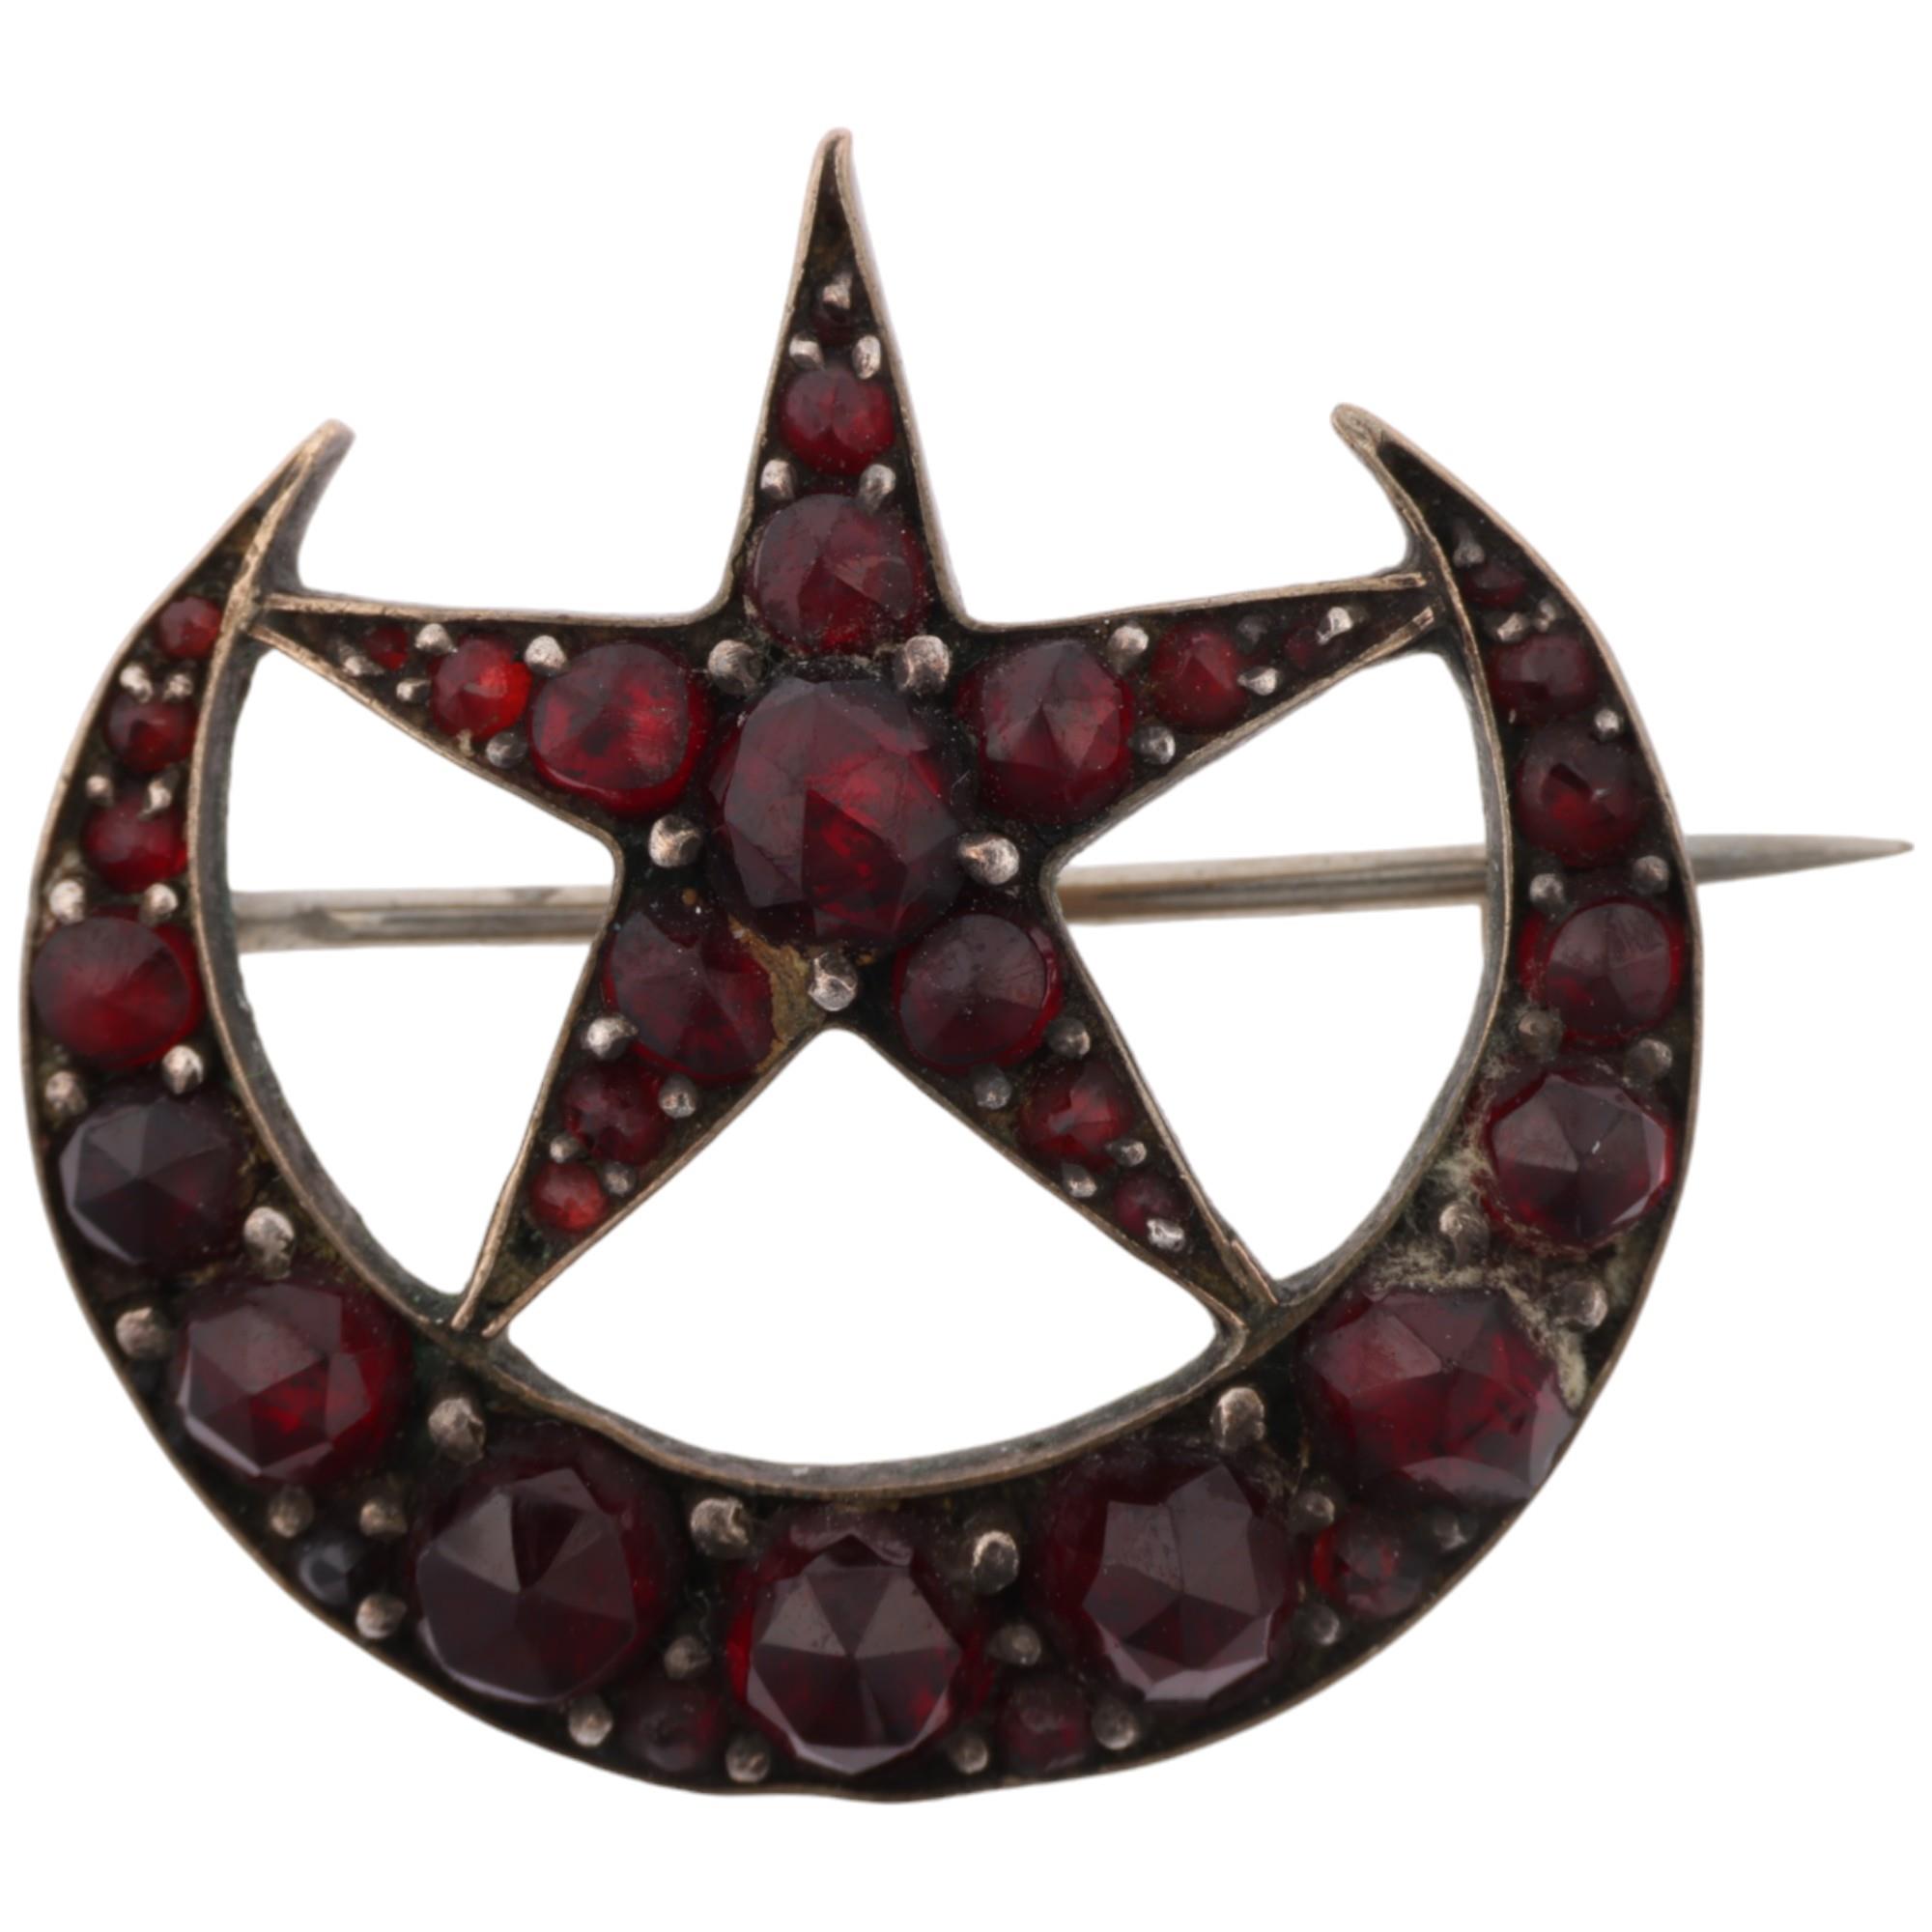 A Victorian Bohemian garnet crescent moon and star brooch, apparently unmarked, 24.2mm, 3.2g